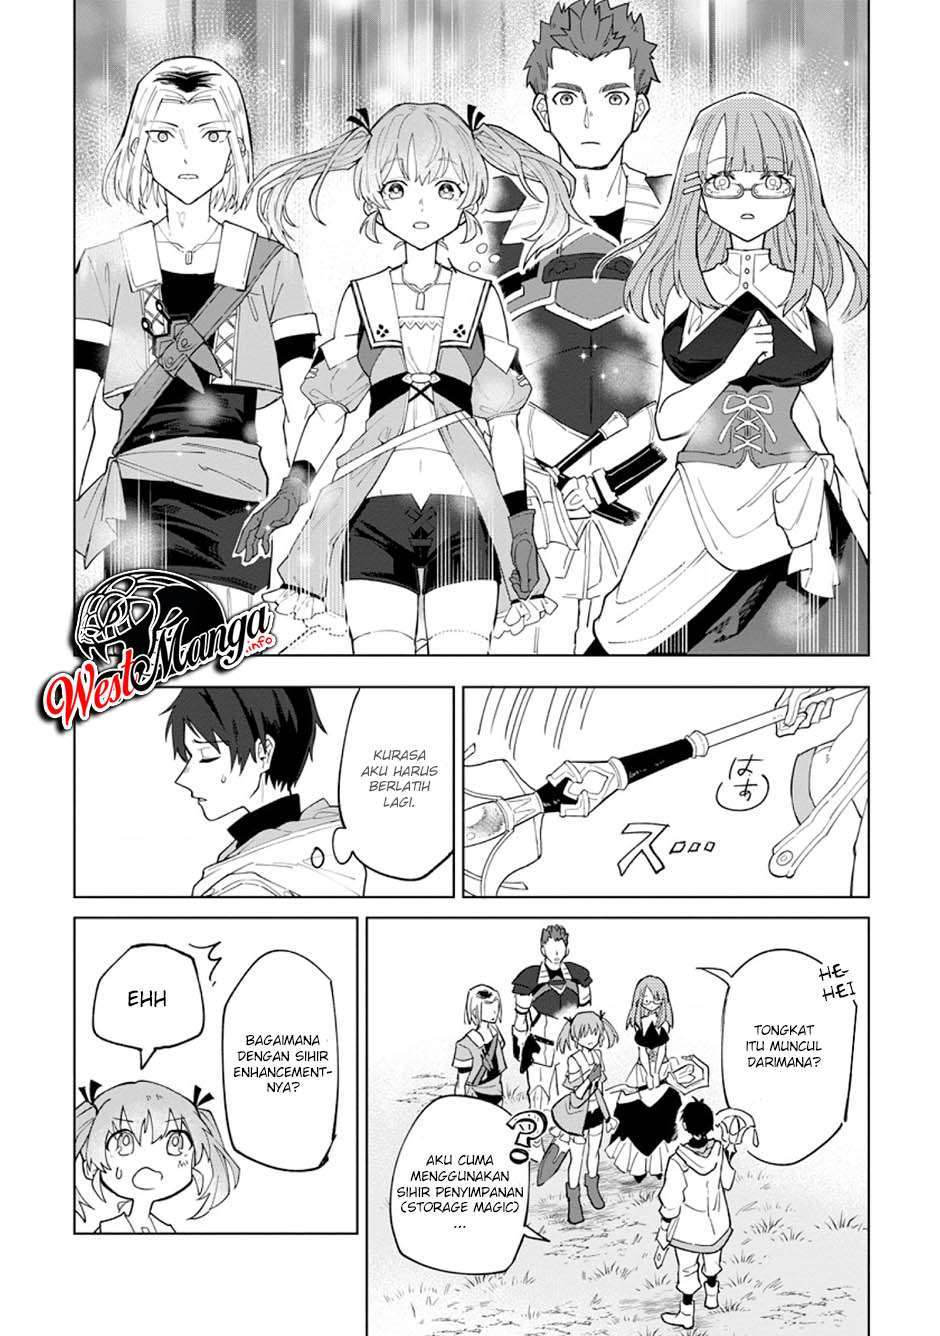 KomiknThe White Mage Who Was Banished From the Hero’s Party Is Picked up by an S Rank Adventurer ~ This White Mage Is Too Out of the Ordinary! Chapter 1